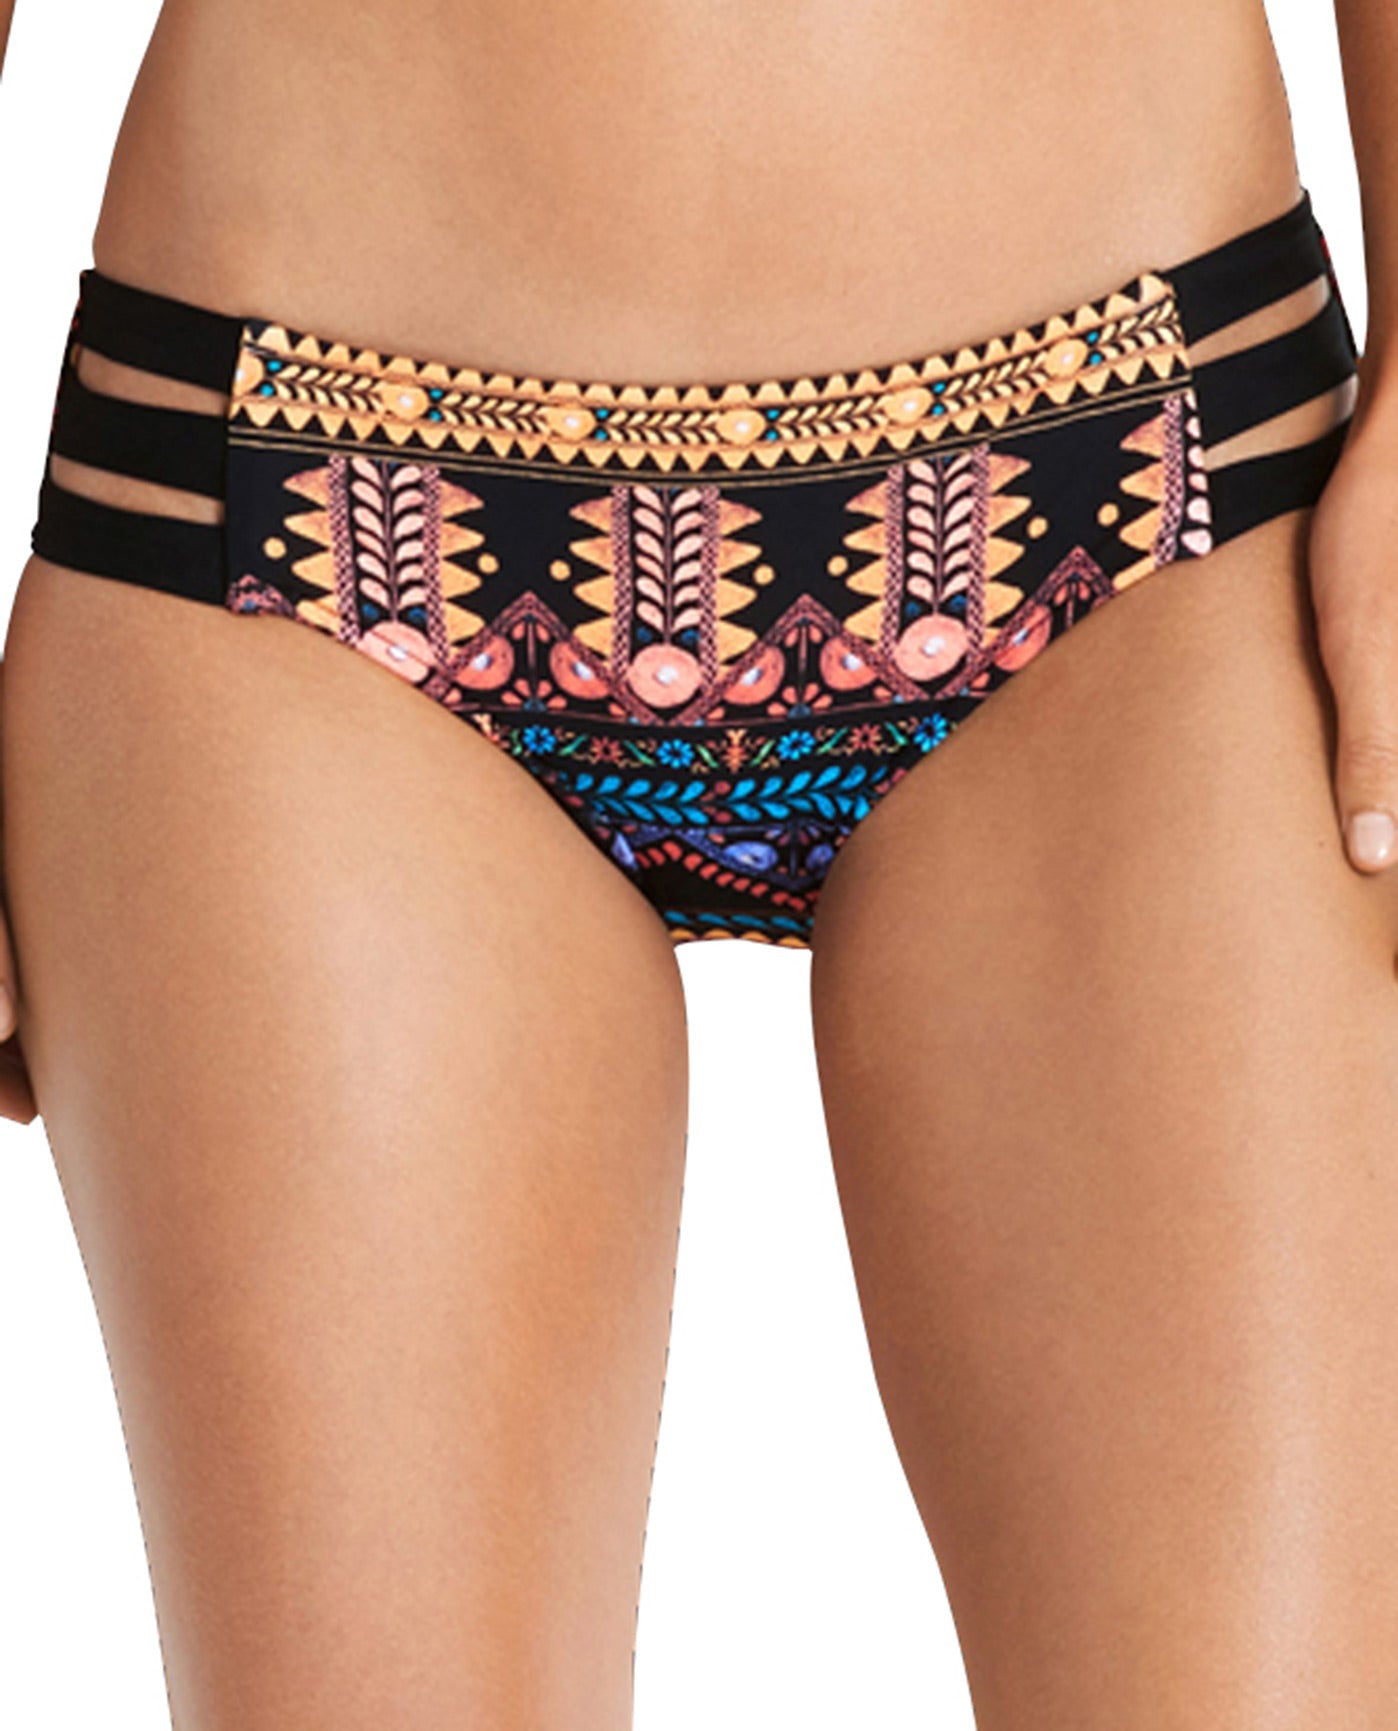 Front View Of Seafolly Spice Temple Strappy Hipster Bikini Bottom | SEA SPICE TEMPLE